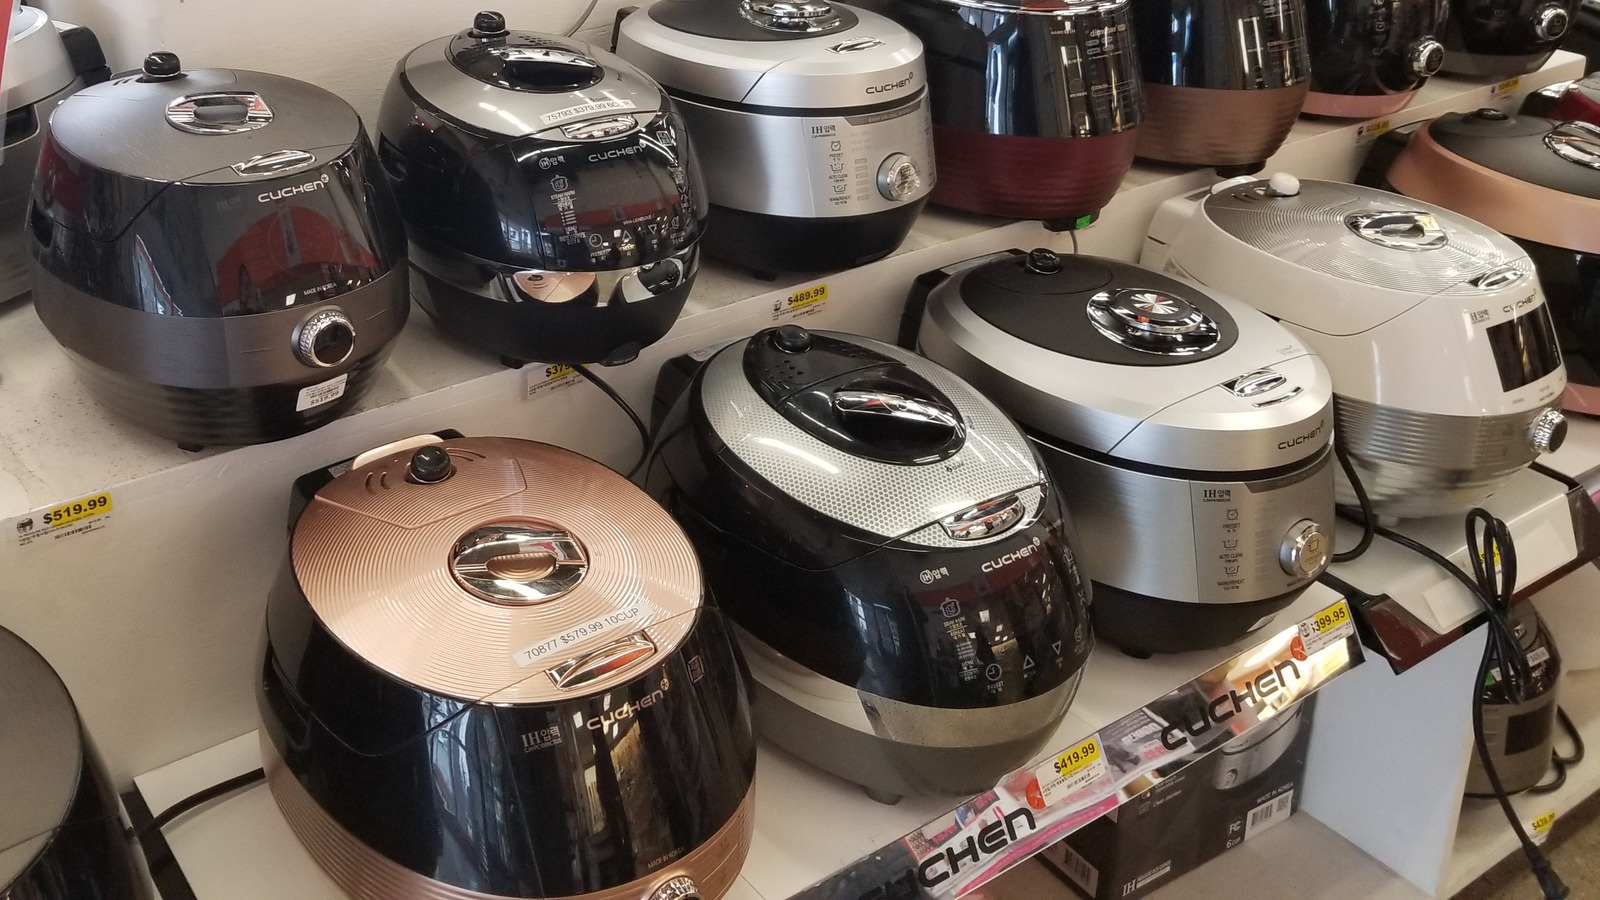 8 Best Rice Cookers of 2023 - Rice Cooker Reviews